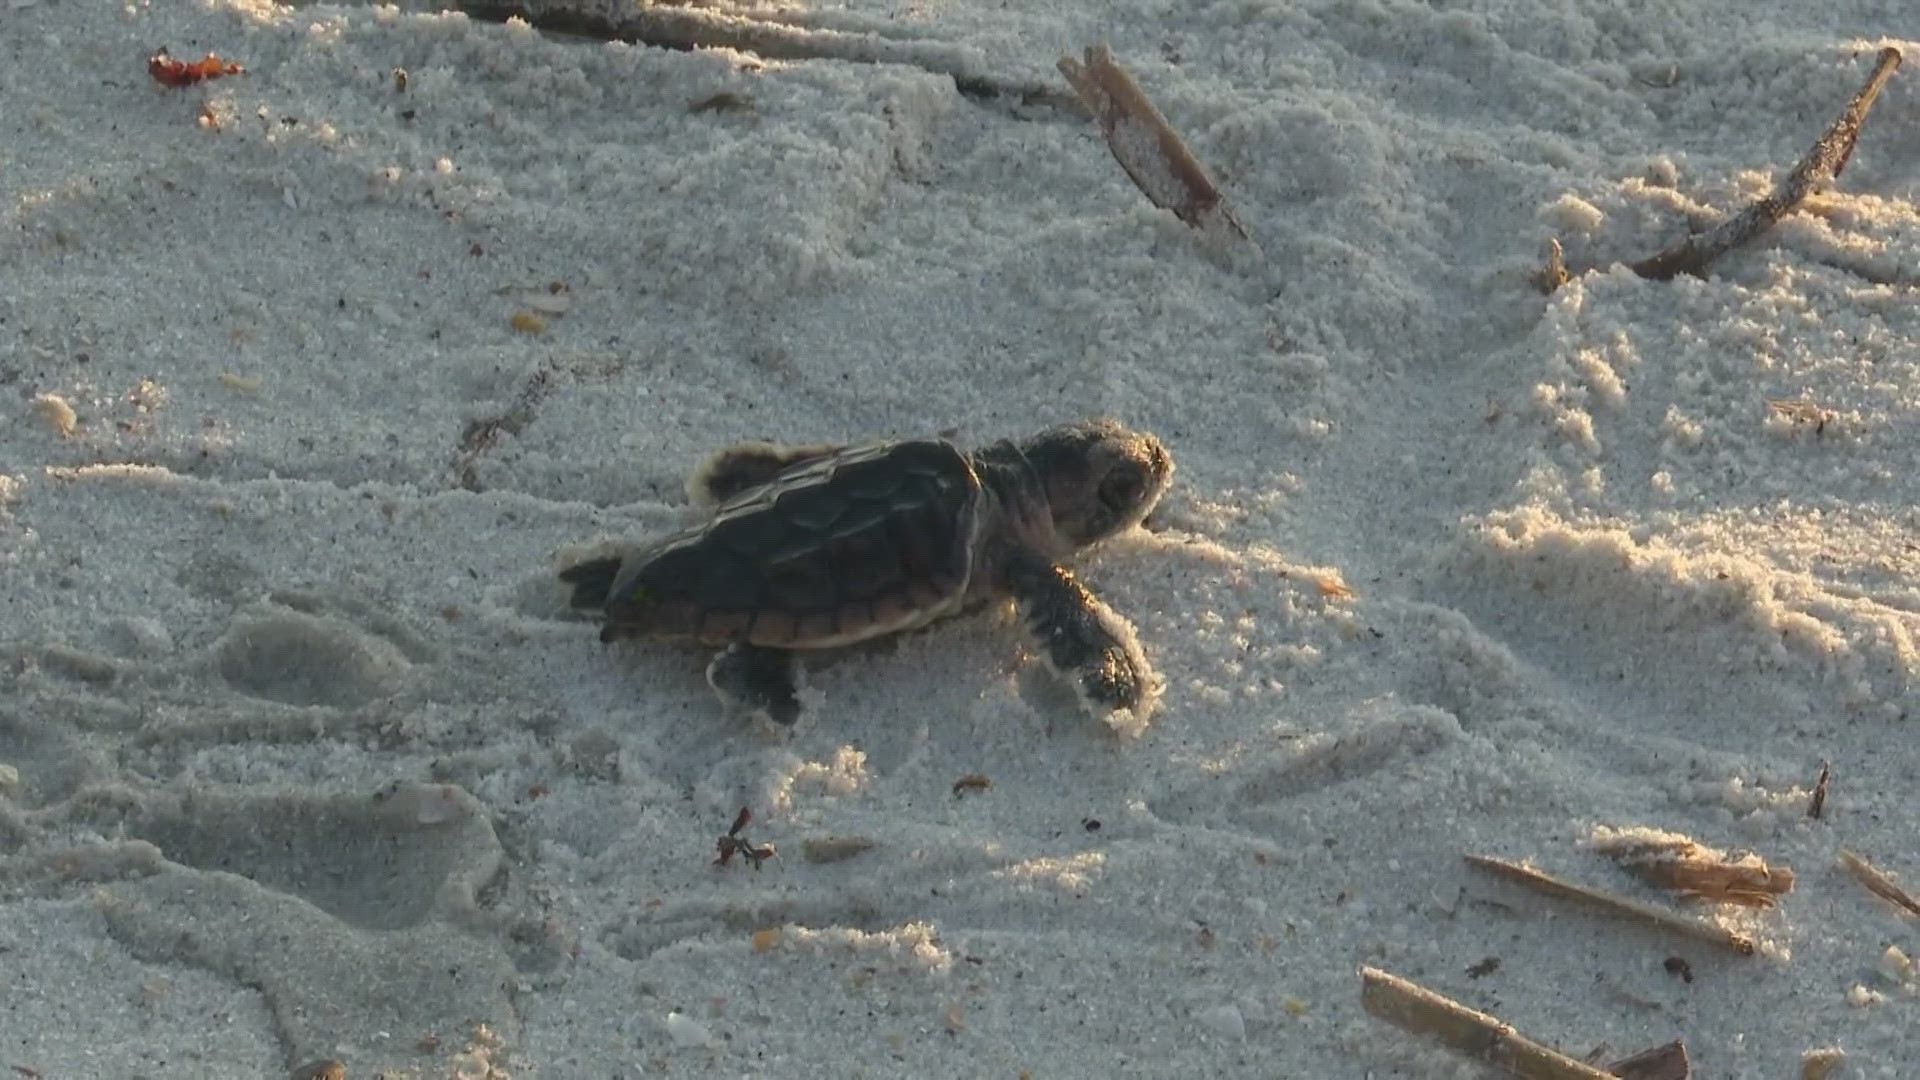 On Sautrday, The Ponte Vedra Sea Turtle Patrol found four additional nests that had baby sea turtles emerge.